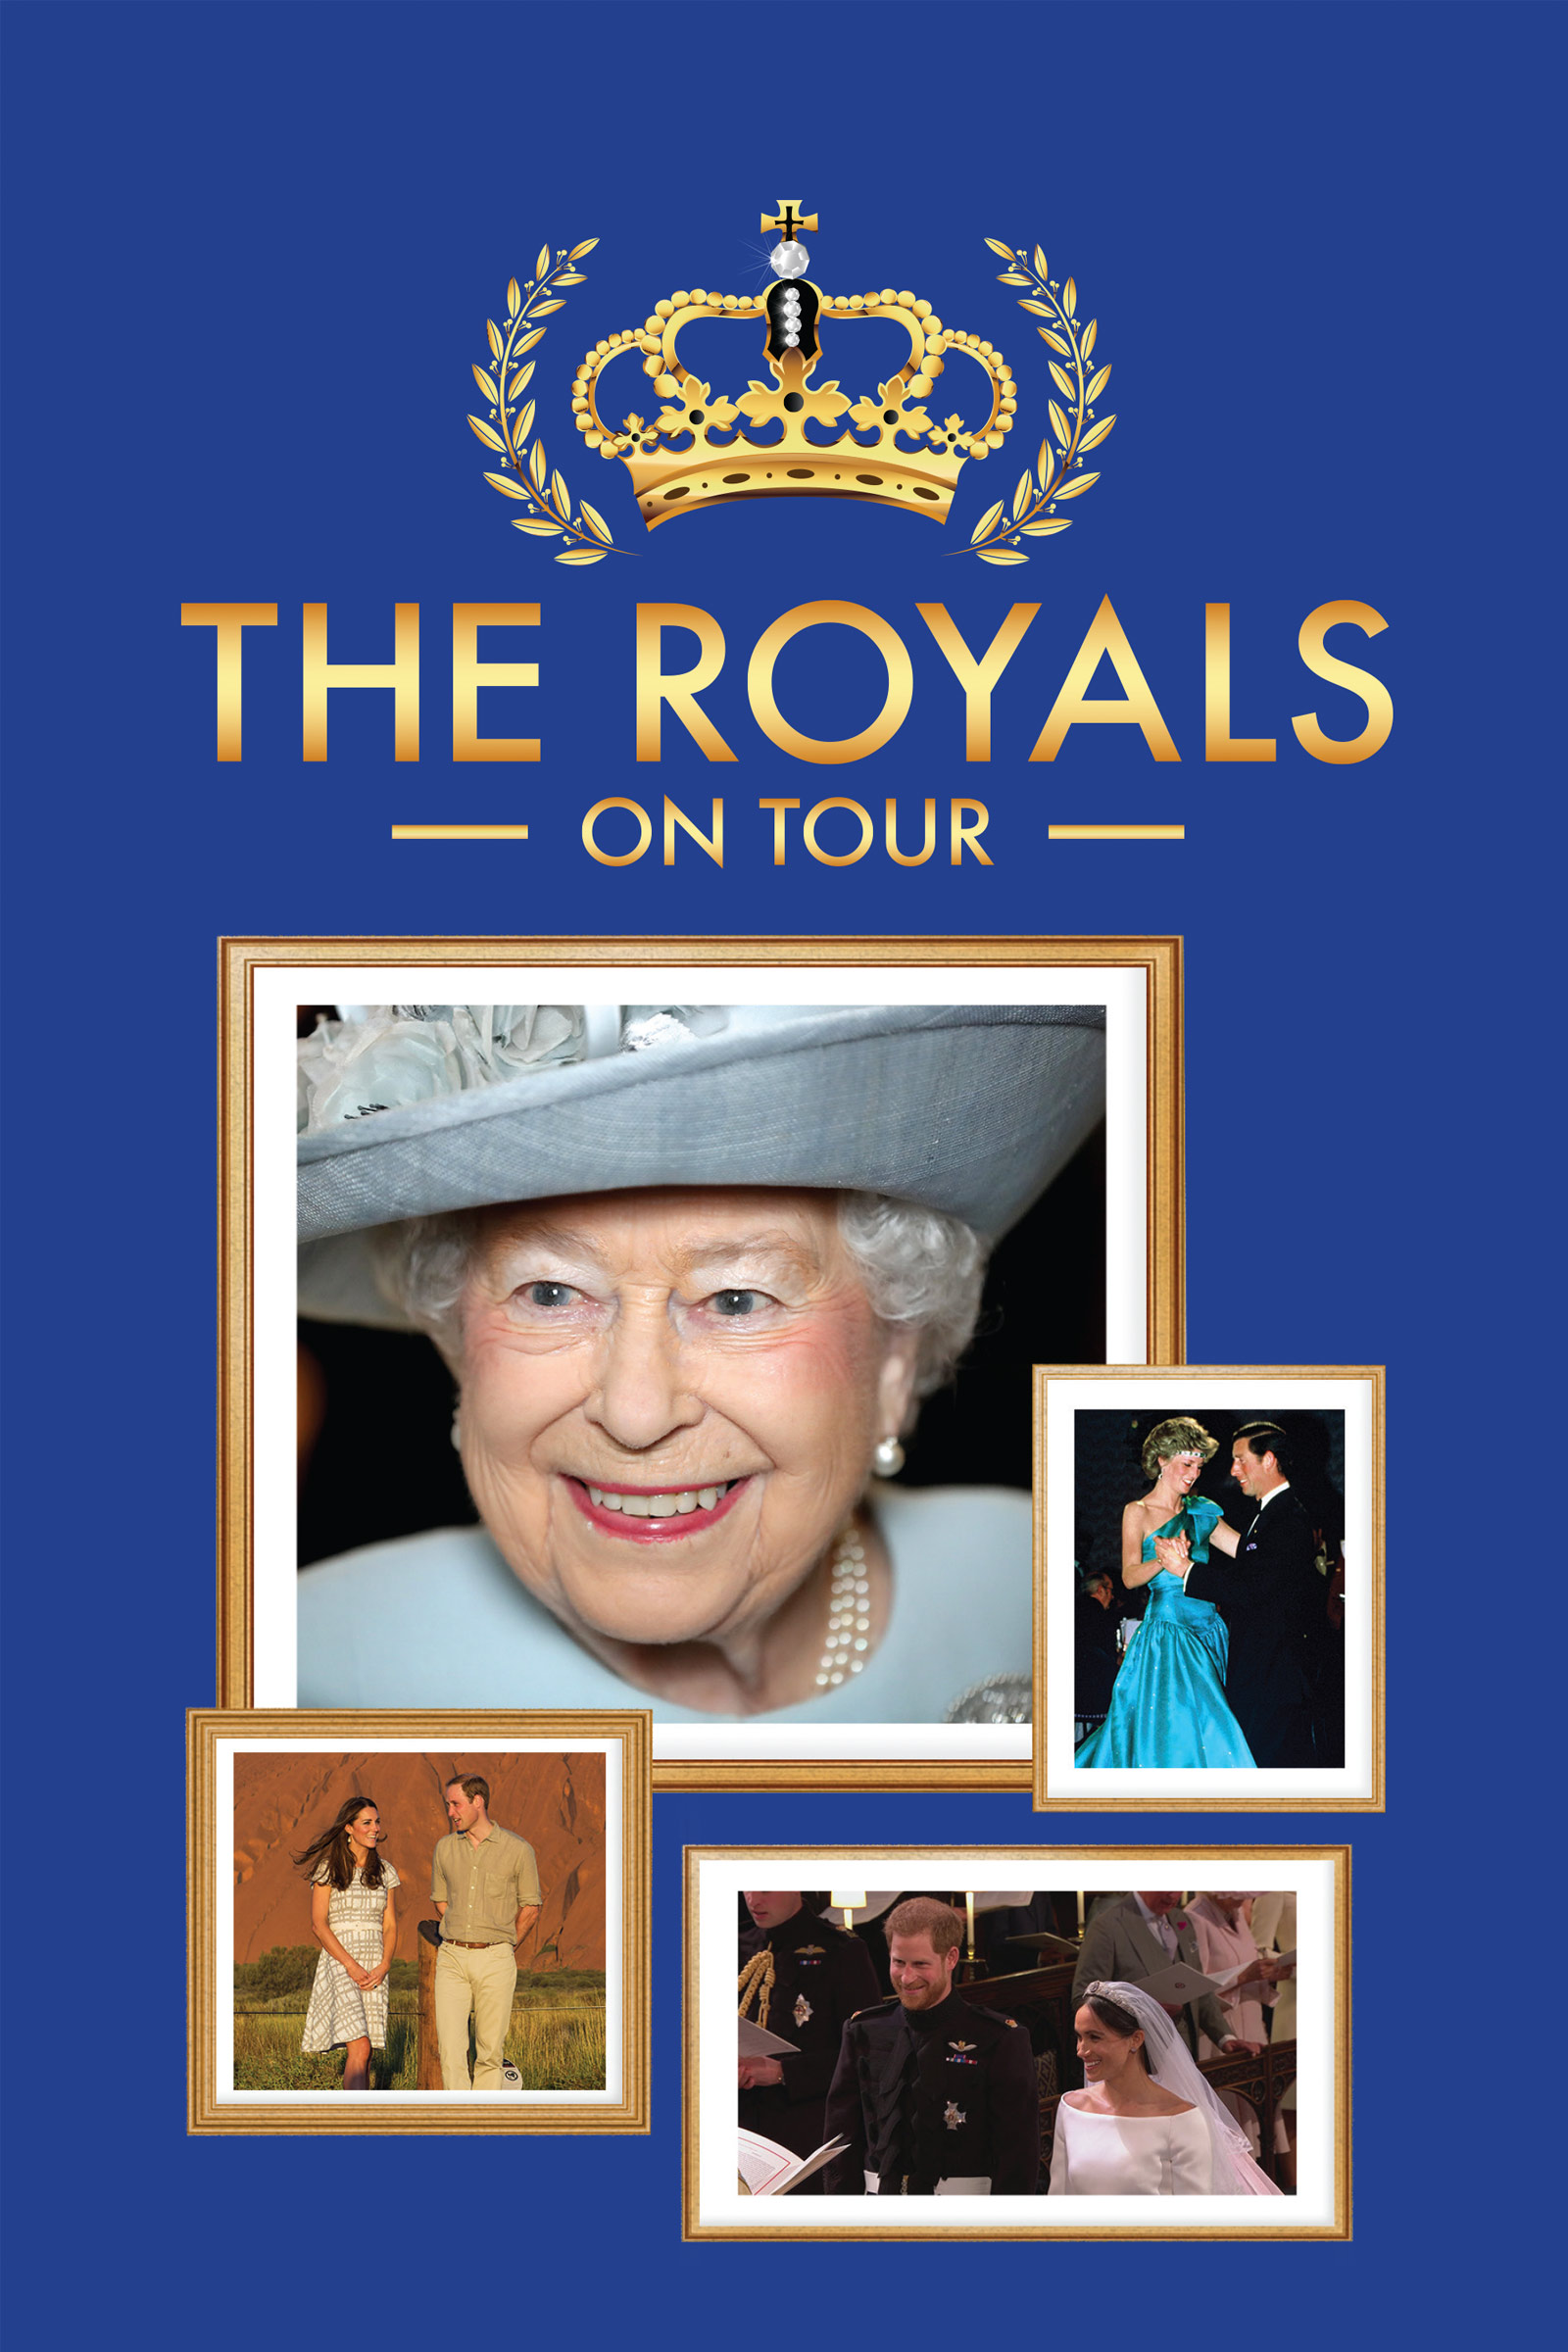 Where to stream The Royals on Tour